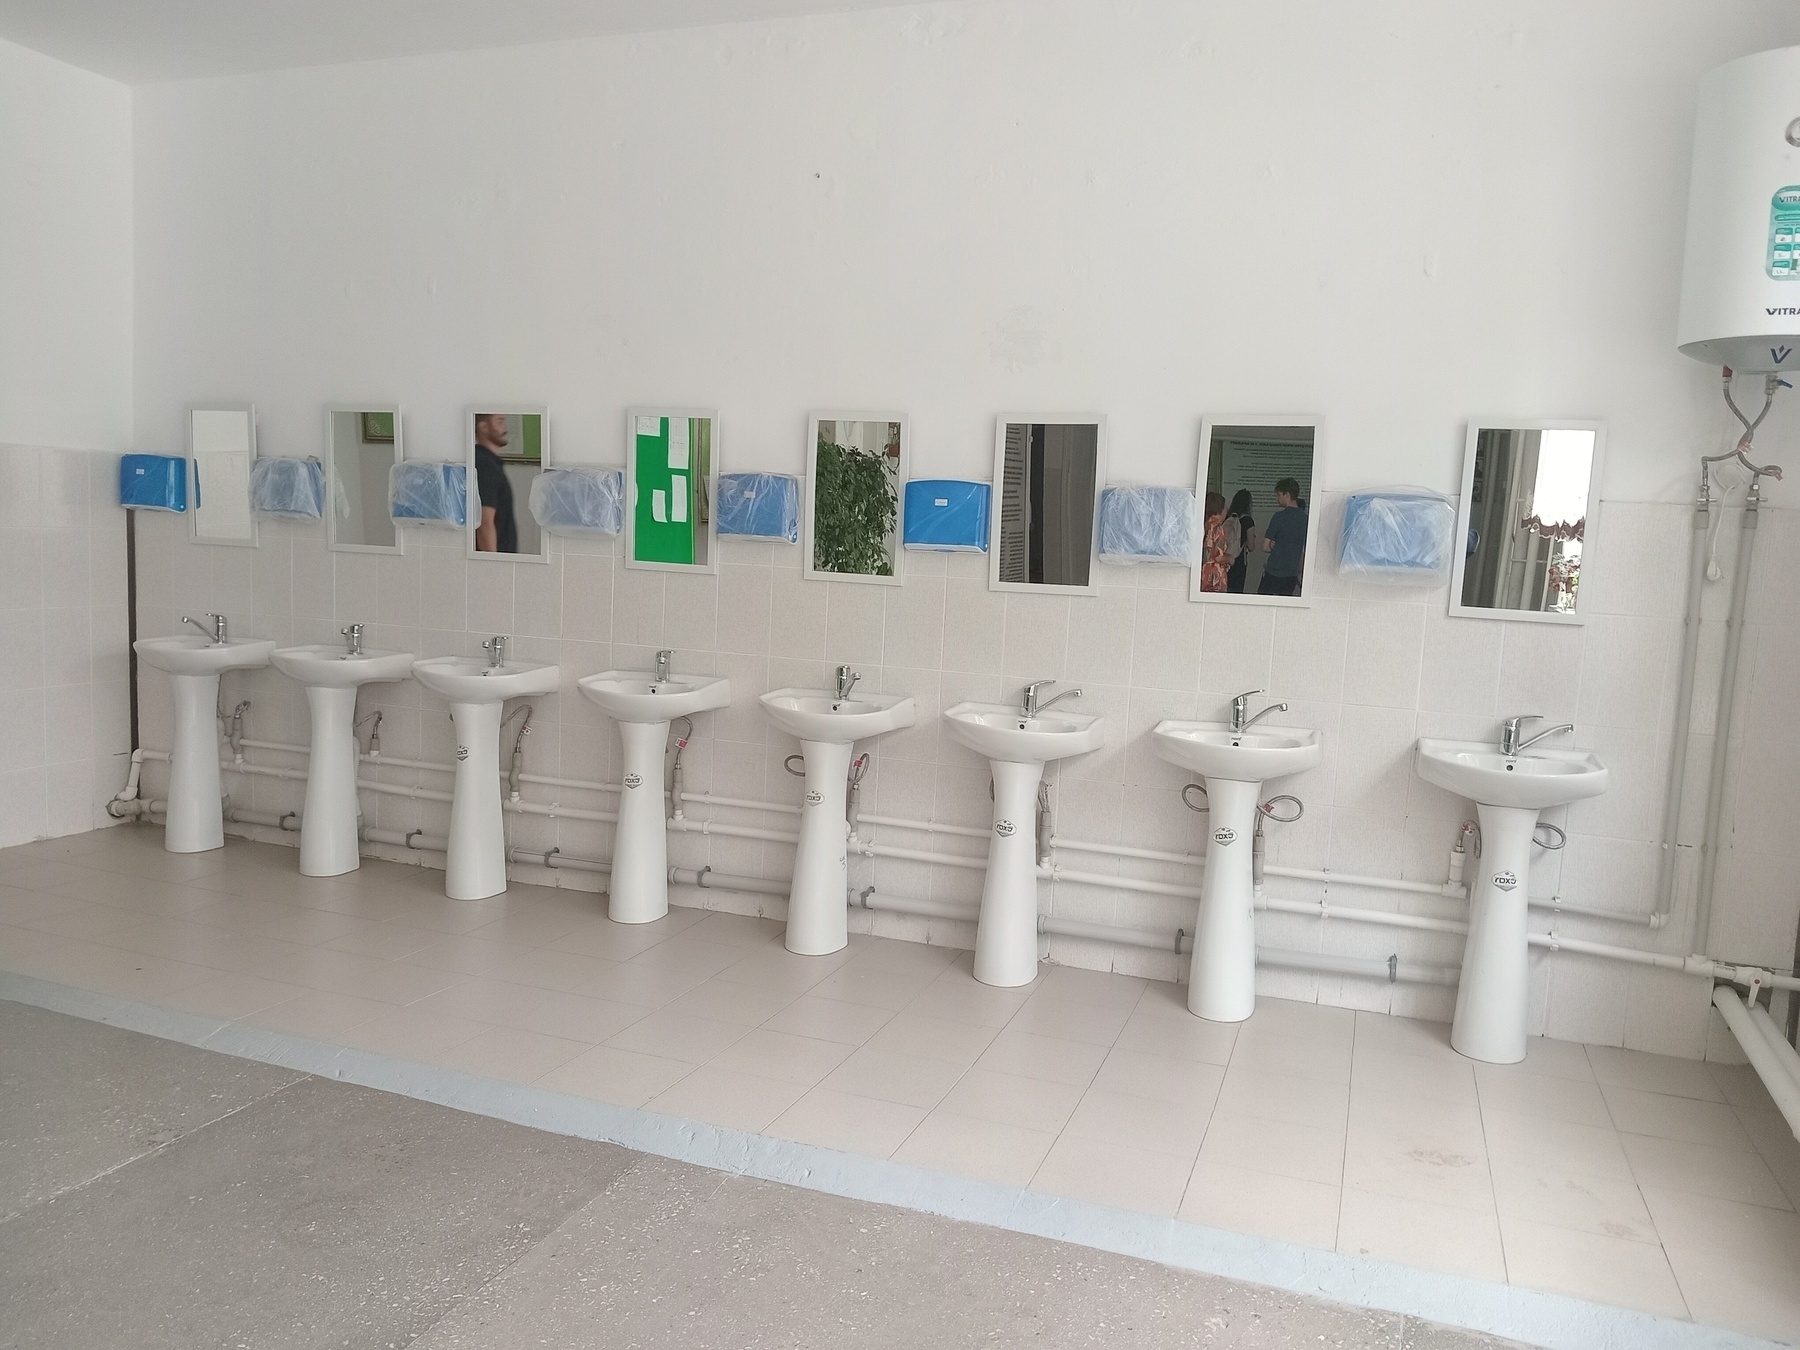 row of 8 white sinks against a wall, each with a small rectangular mirror above it